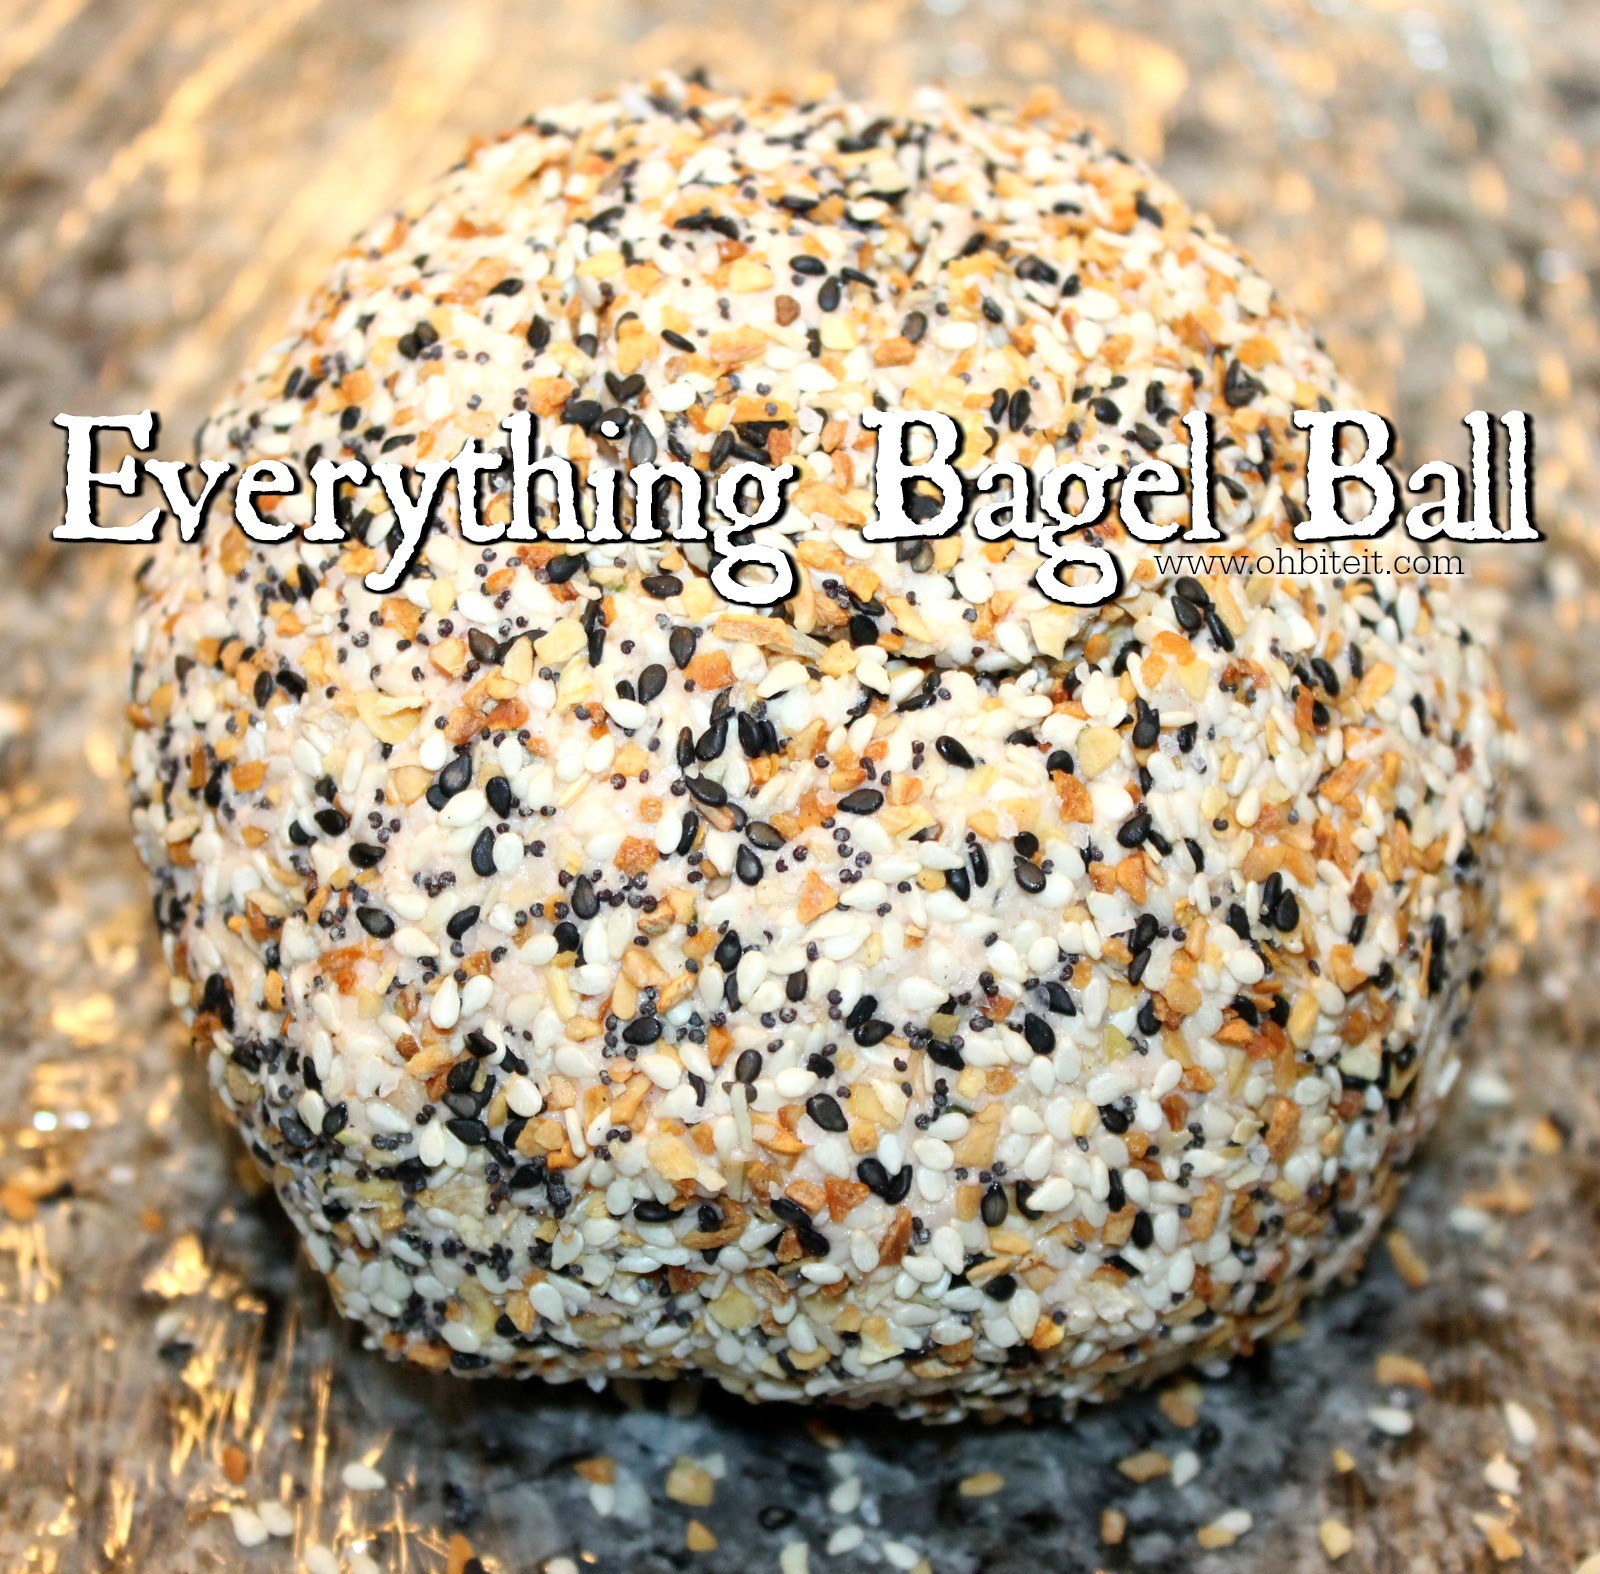 ~Everything Bagel Ball.. featuring: Cedar Bay Grilling Company!